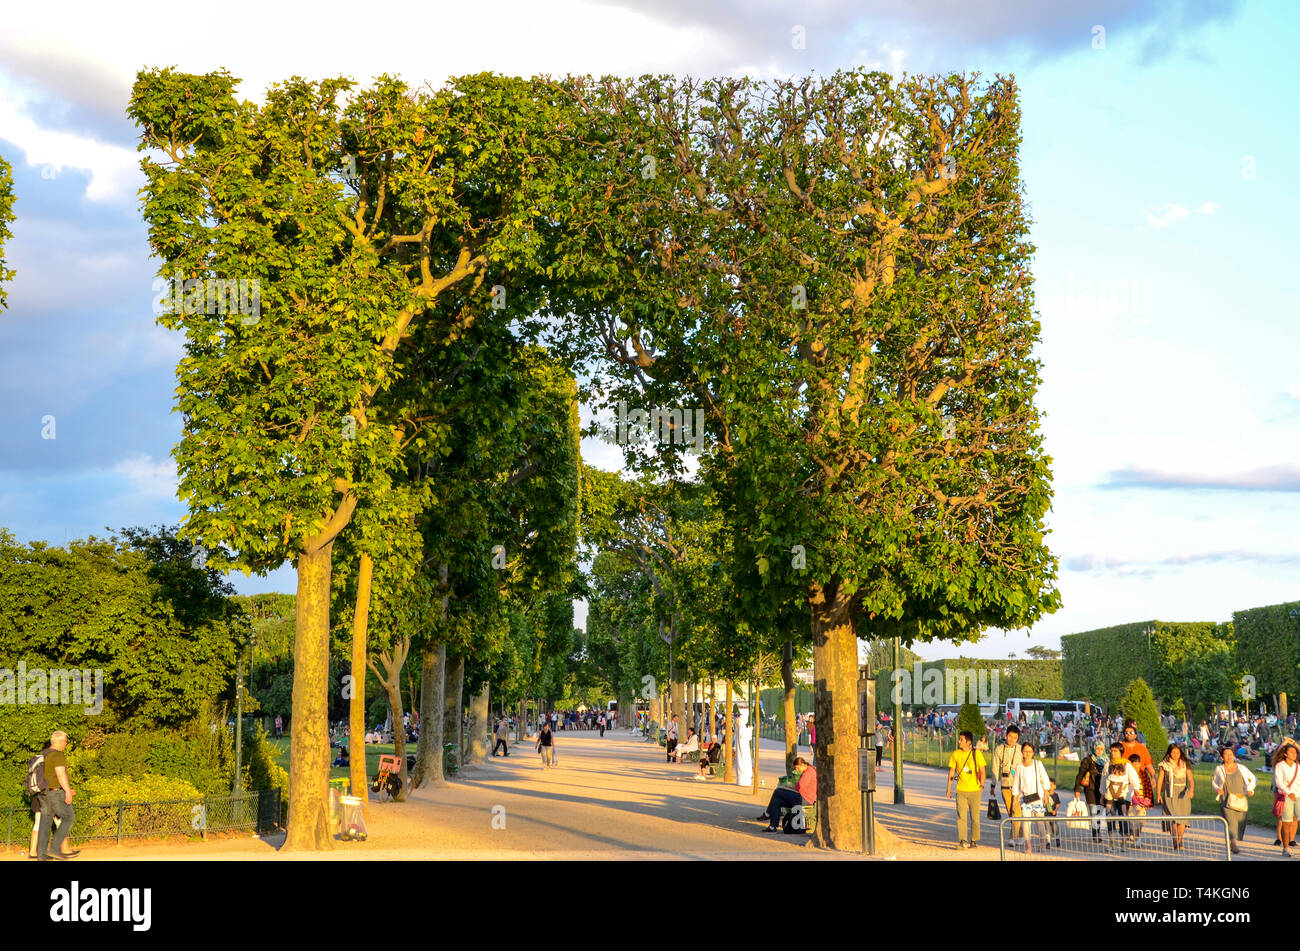 Champ de Mars park and gardens with square cut trees. Topiary. Avenue of trees. People, tourists, visitors to the park near Eiffel Tower Stock Photo